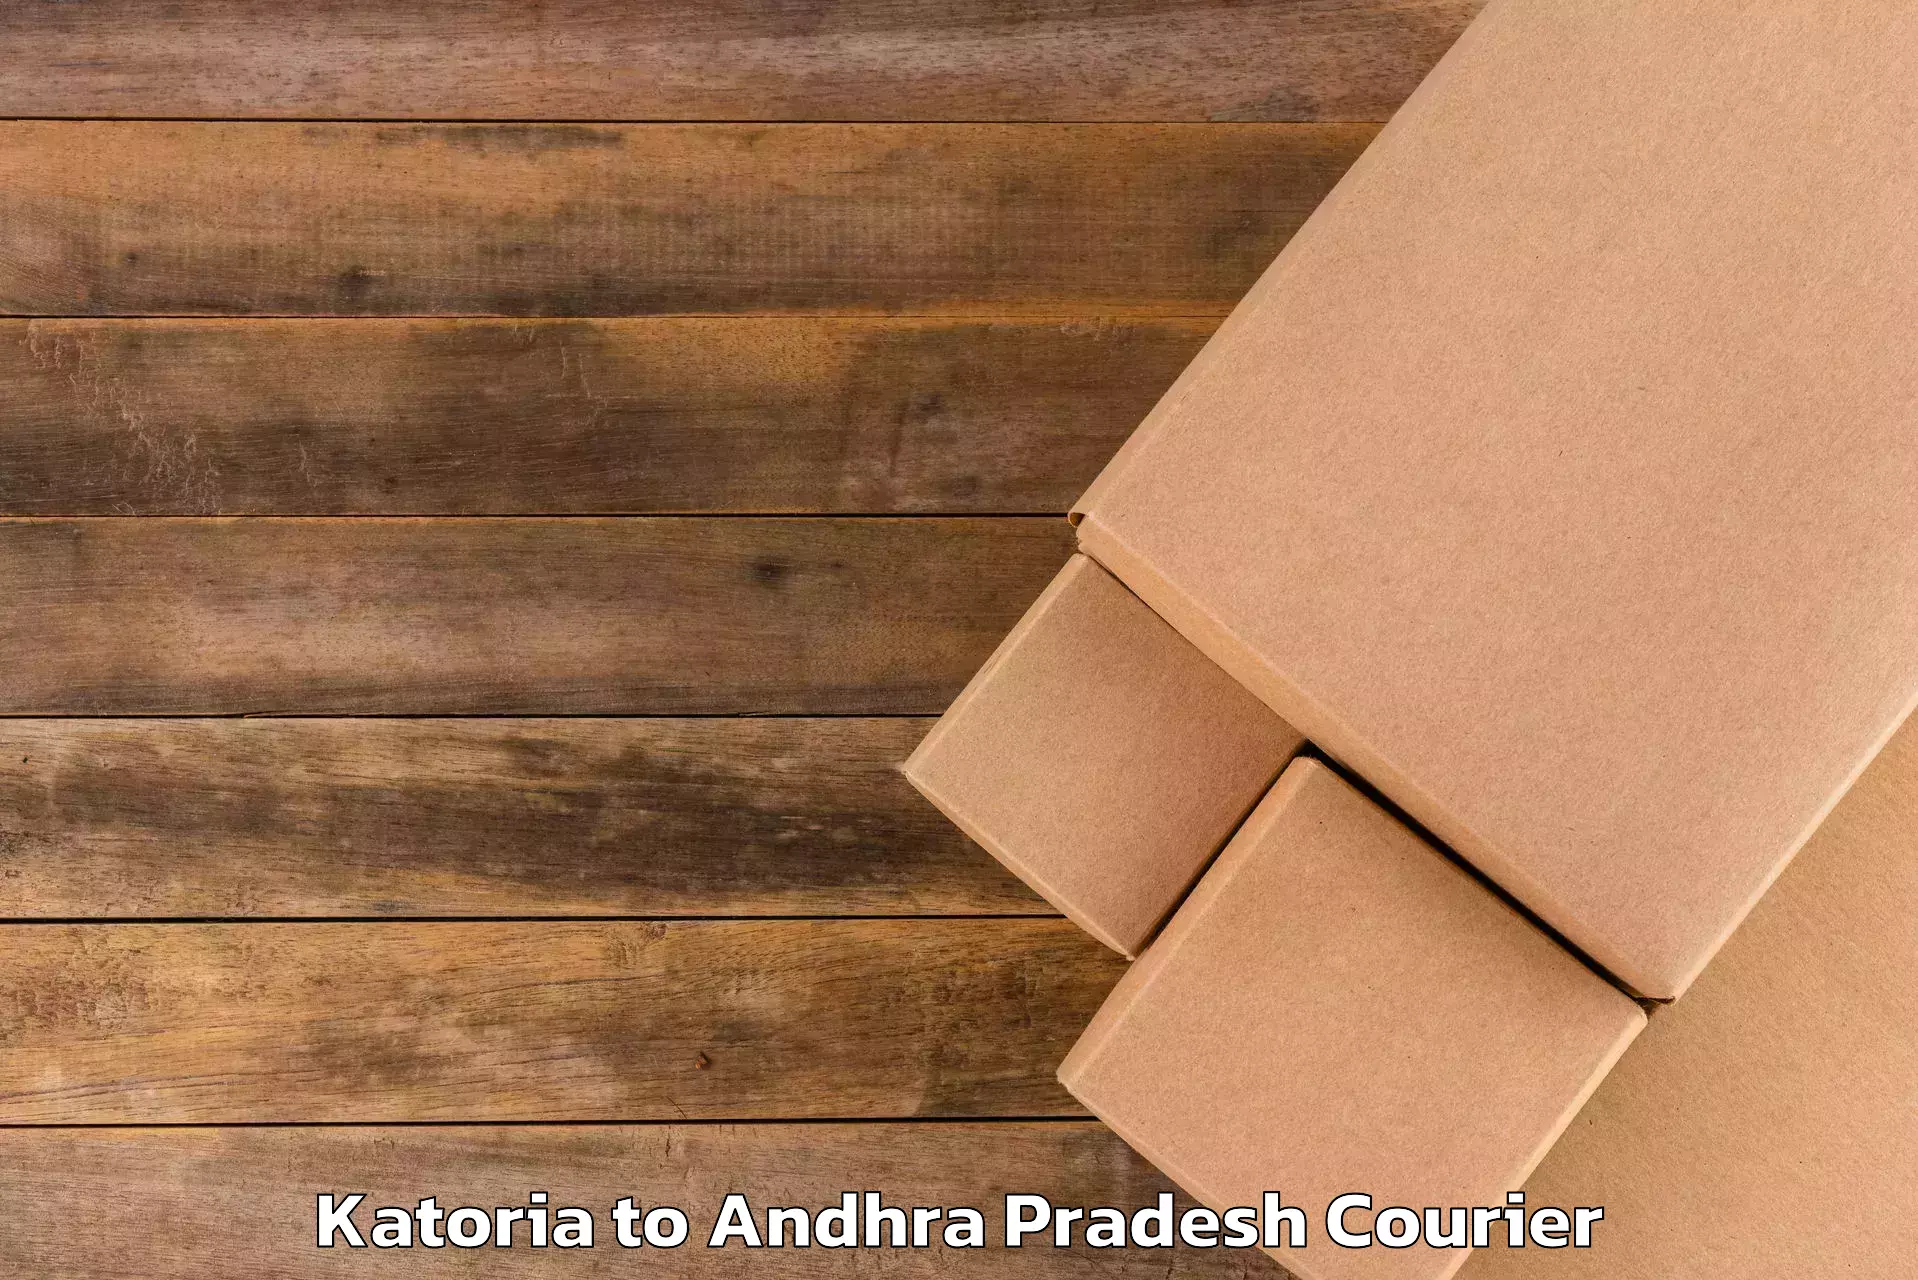 Baggage delivery technology Katoria to Visakhapatnam Port